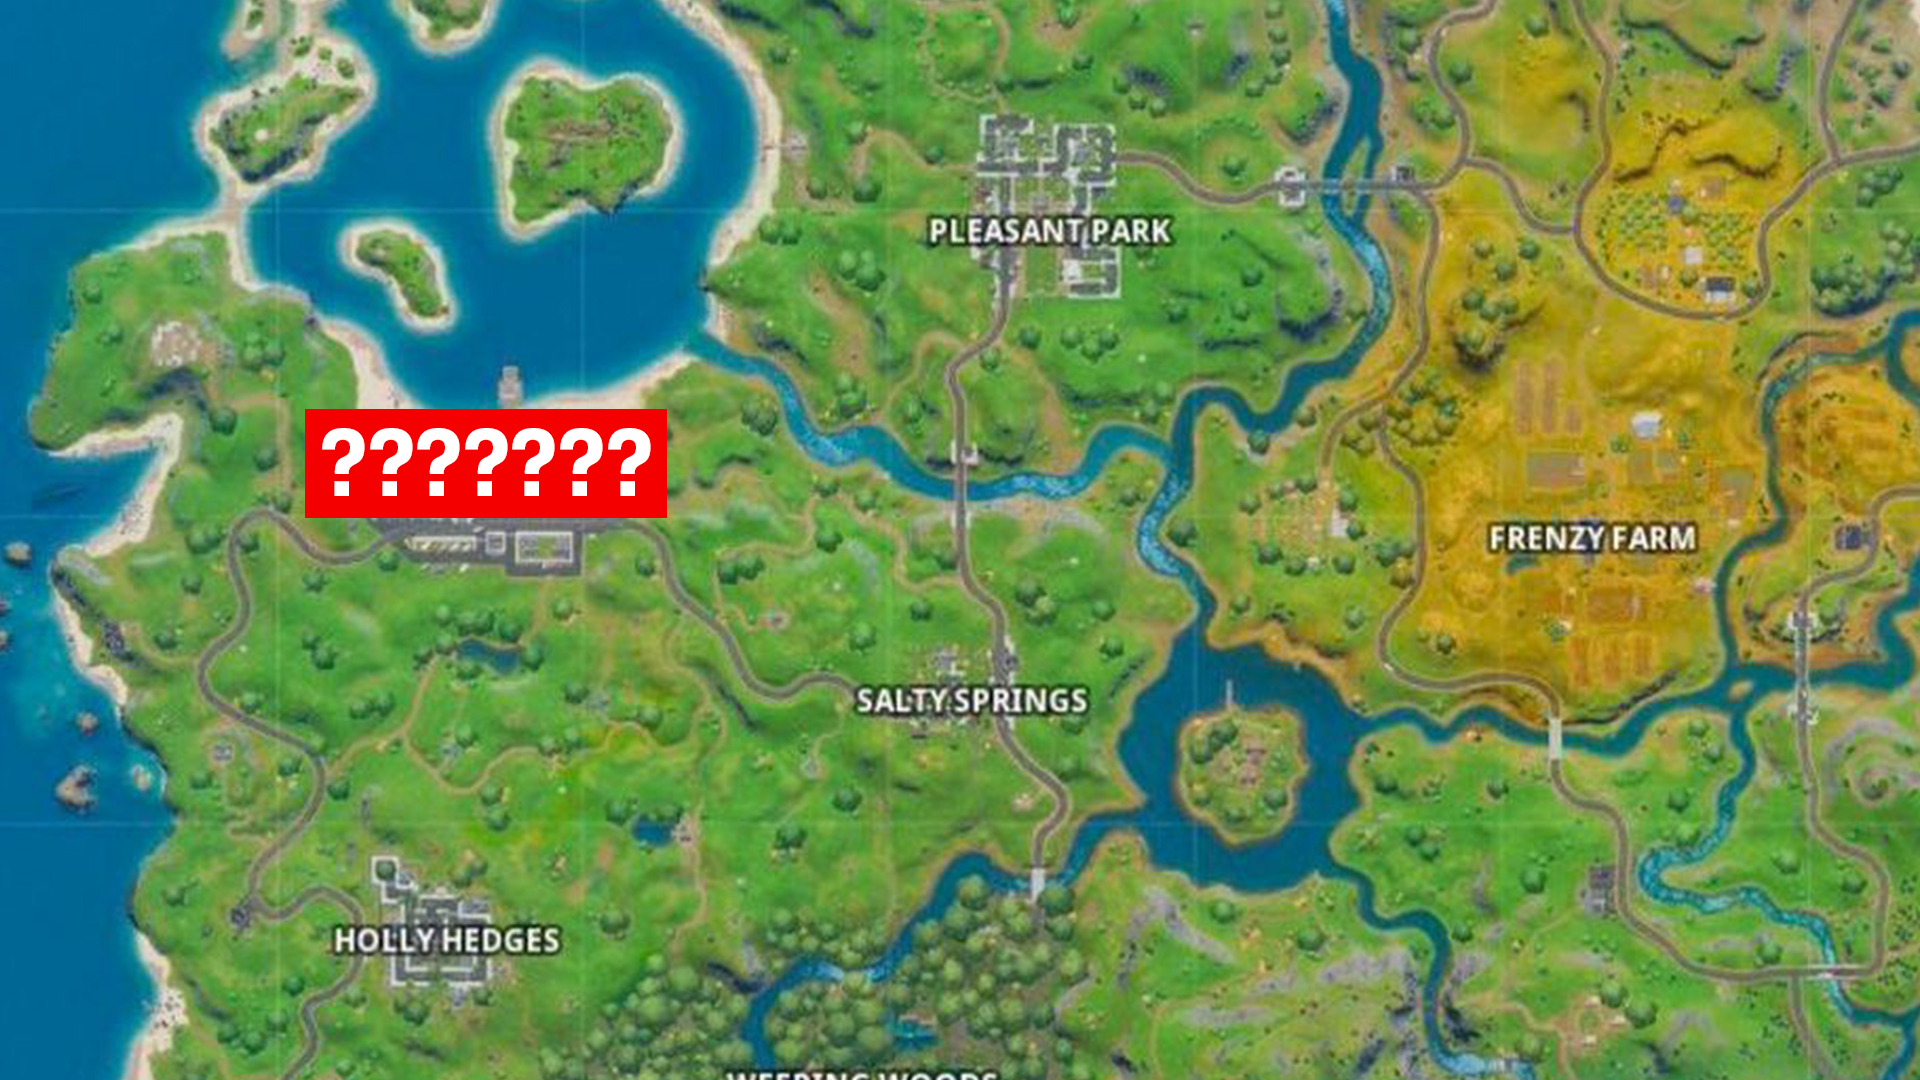 The Fortnite Chapter 2 map